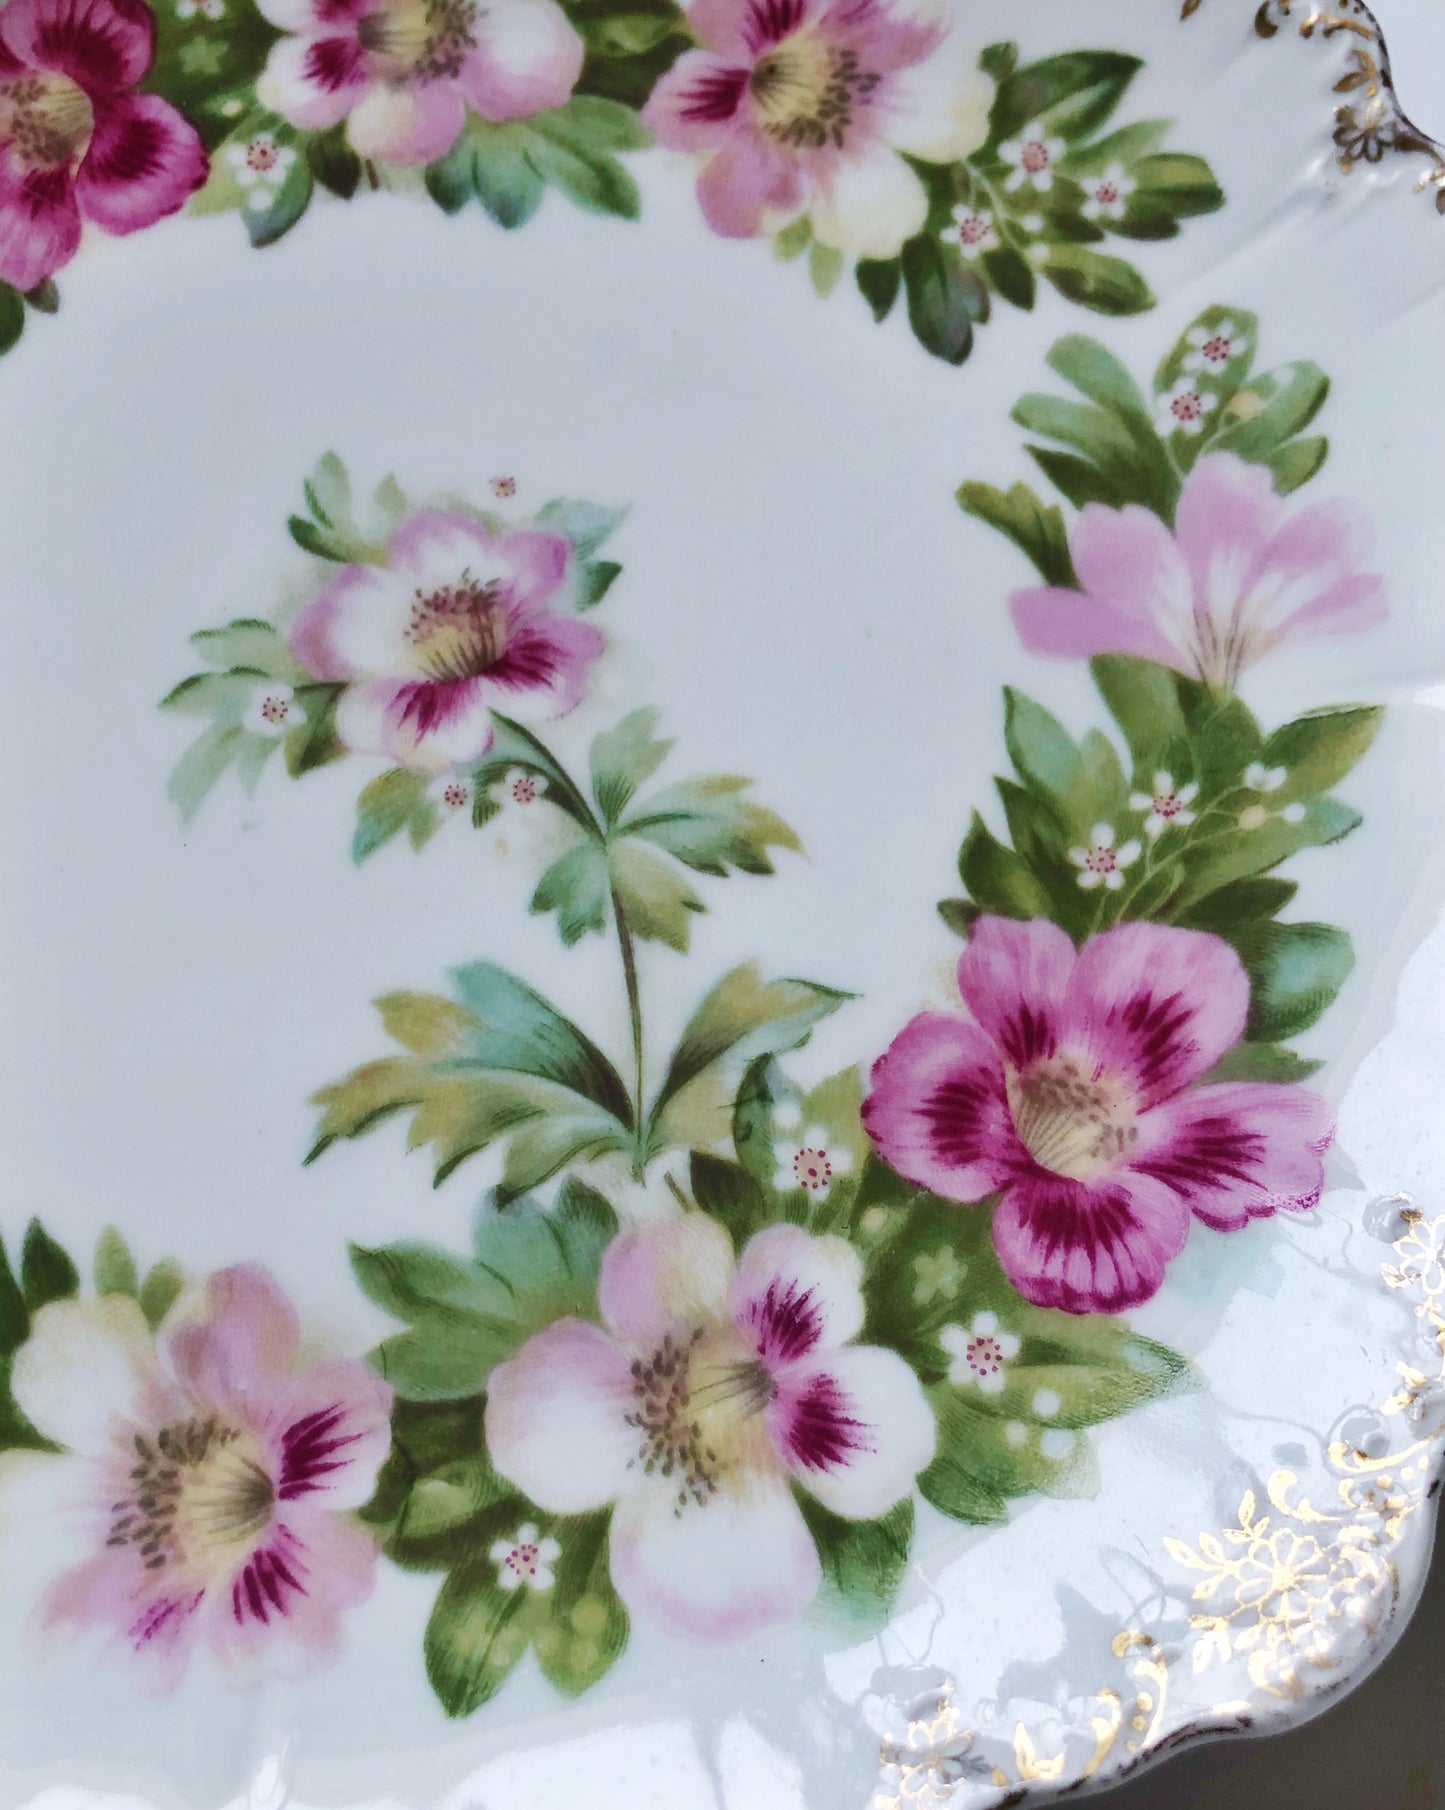 Antique Rosenthal hand painted pansies plate